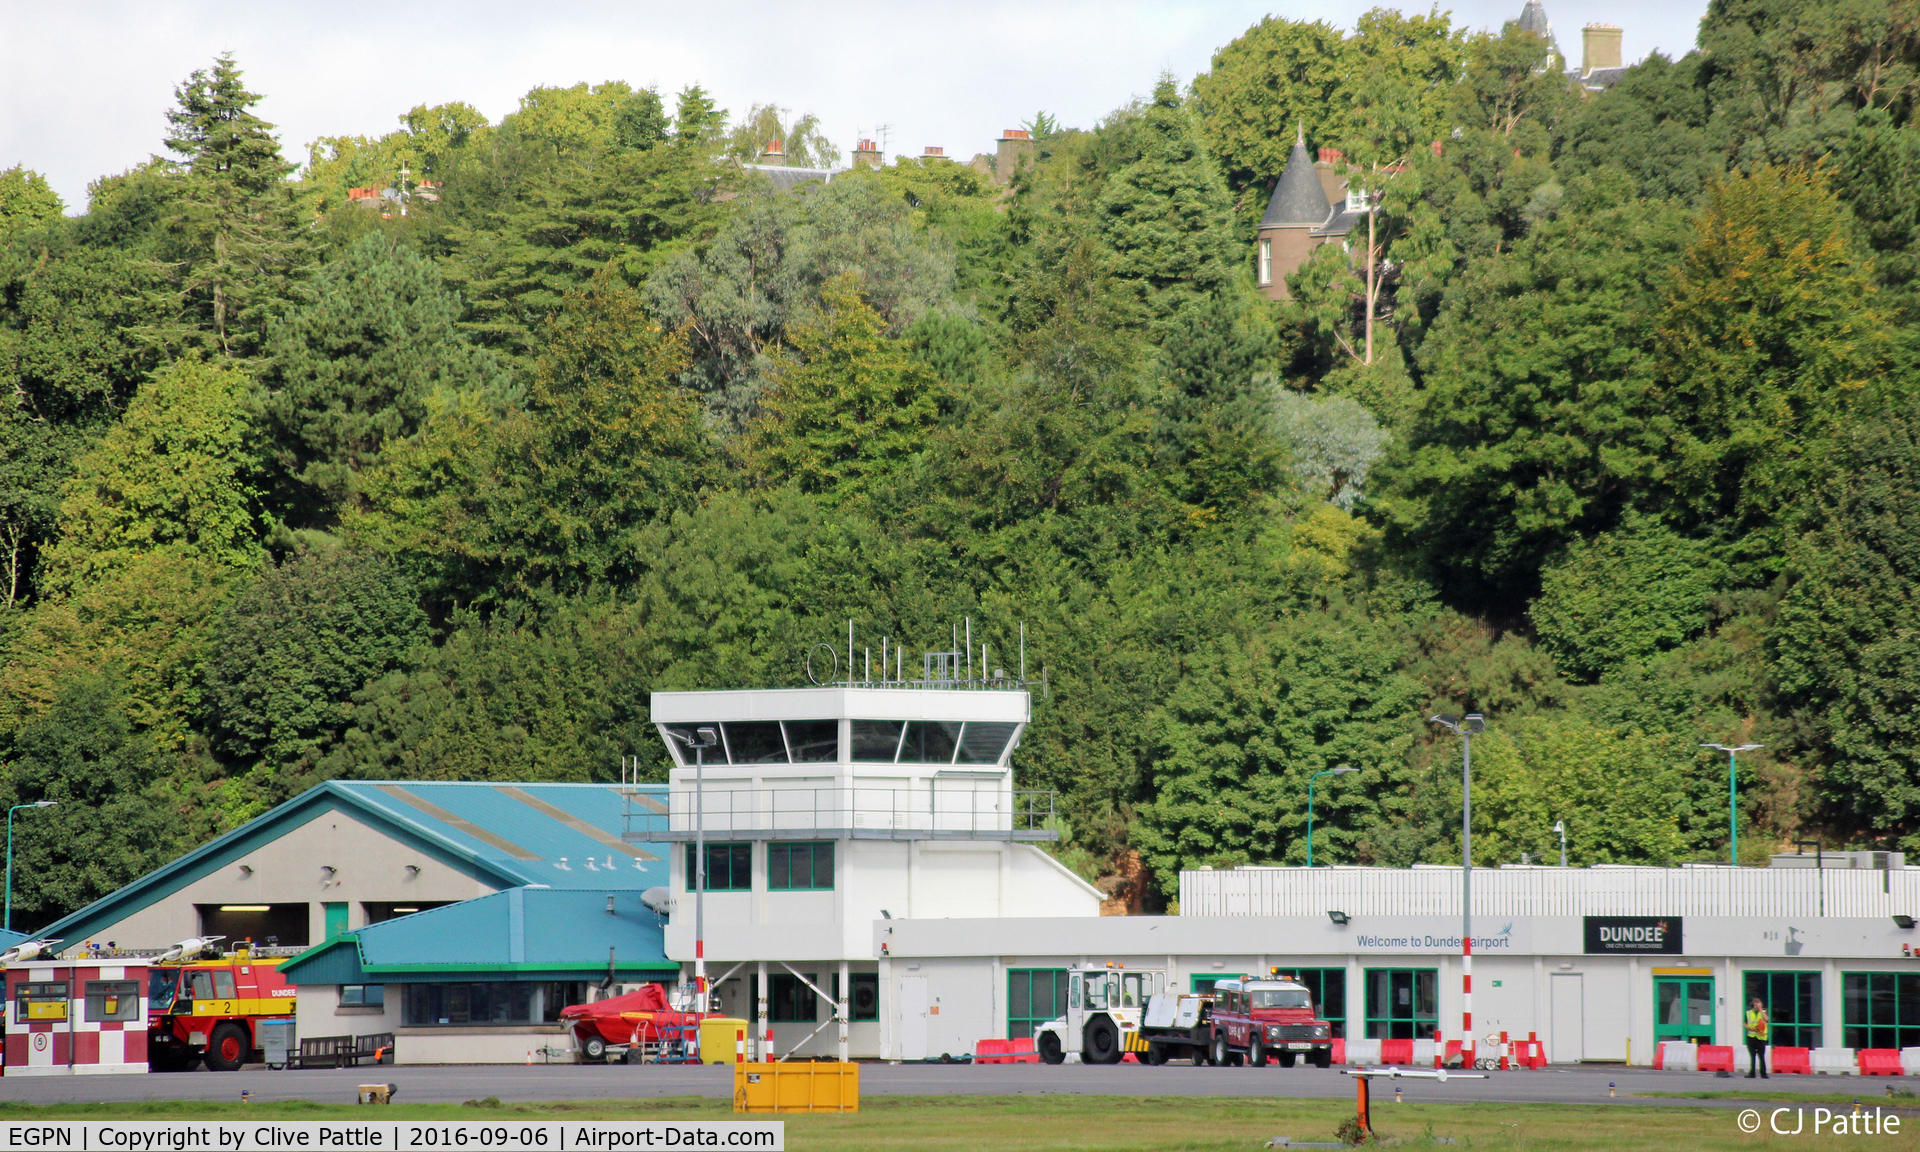 Dundee Airport, Dundee, Scotland United Kingdom (EGPN) - Terminal Building at Dundee EGPN